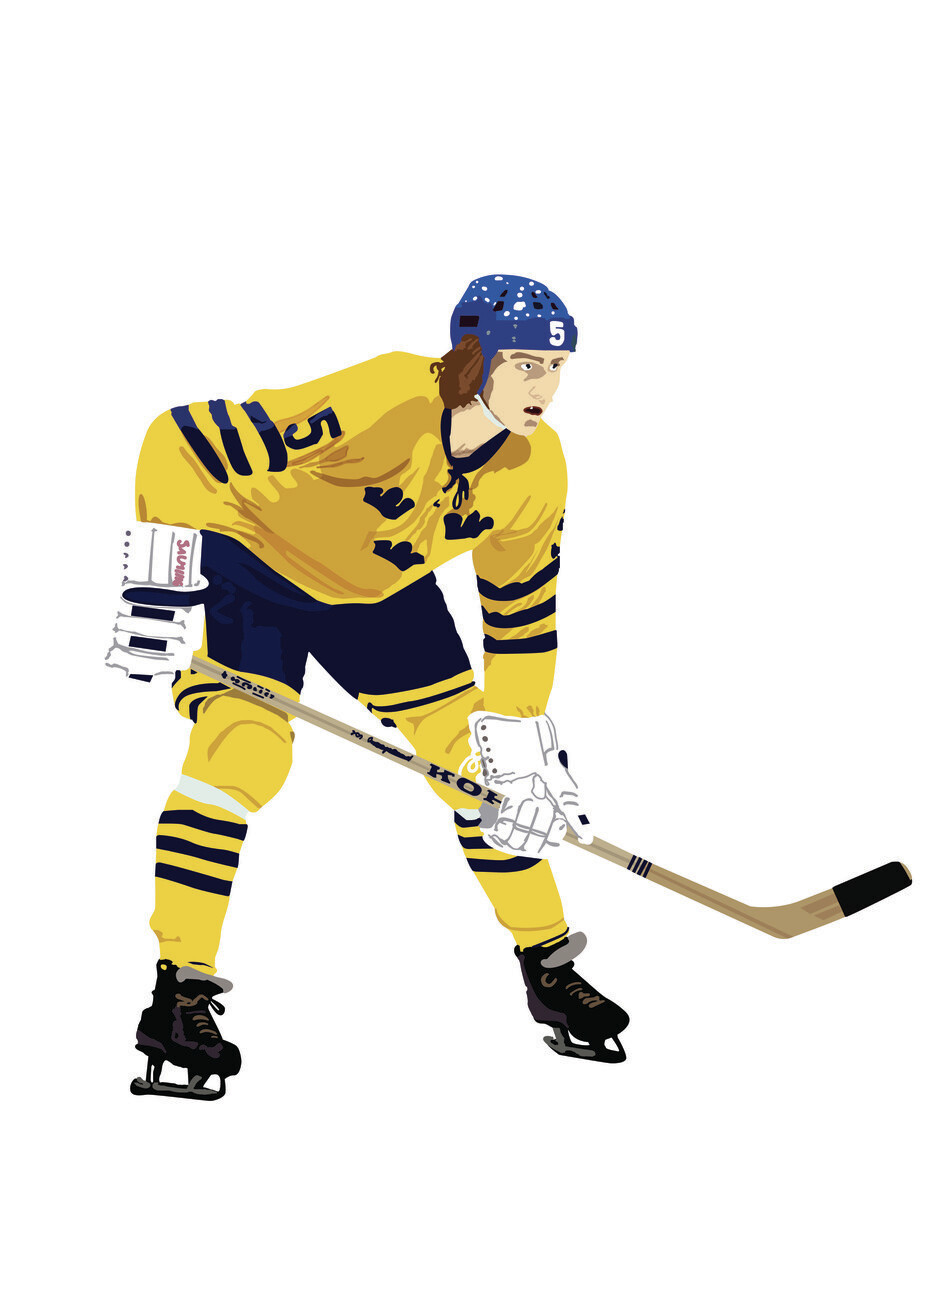 Börje Salming Ice Hockey Wall Mural Buy online at Europosters